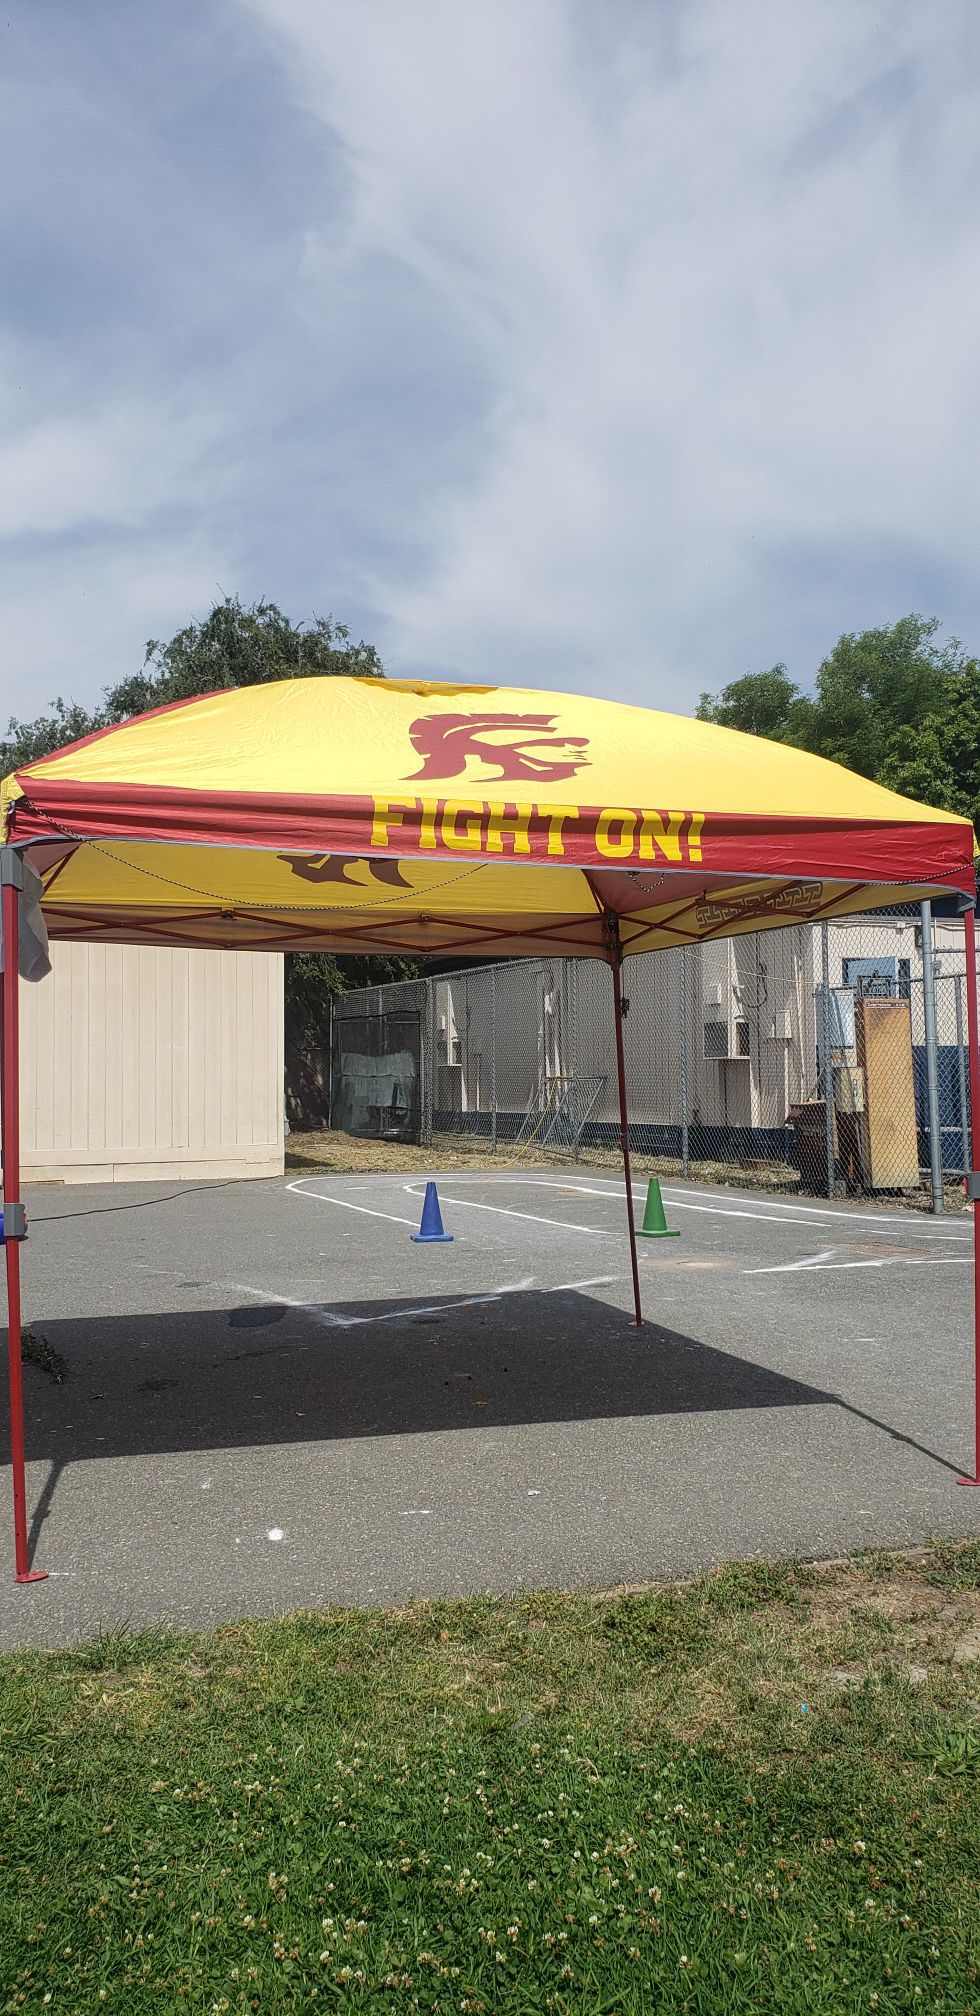 Like New USC Trojans Coleman Canopy. Firm price.